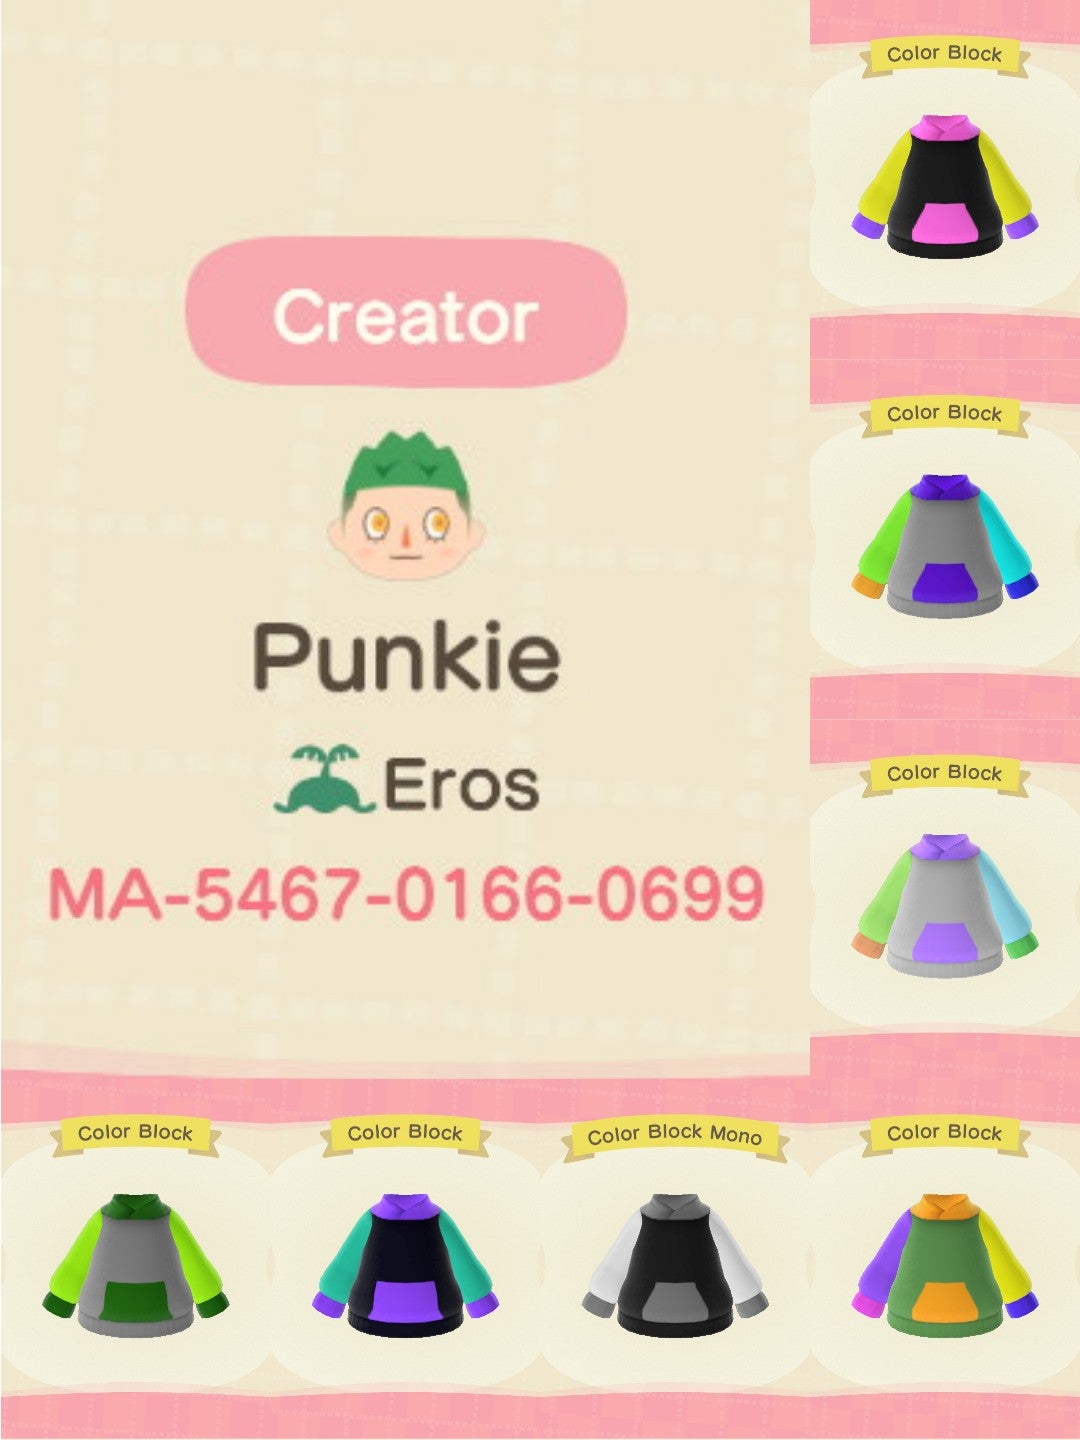 Animal Crossing Wanted some chaotic color block hoodies messed around